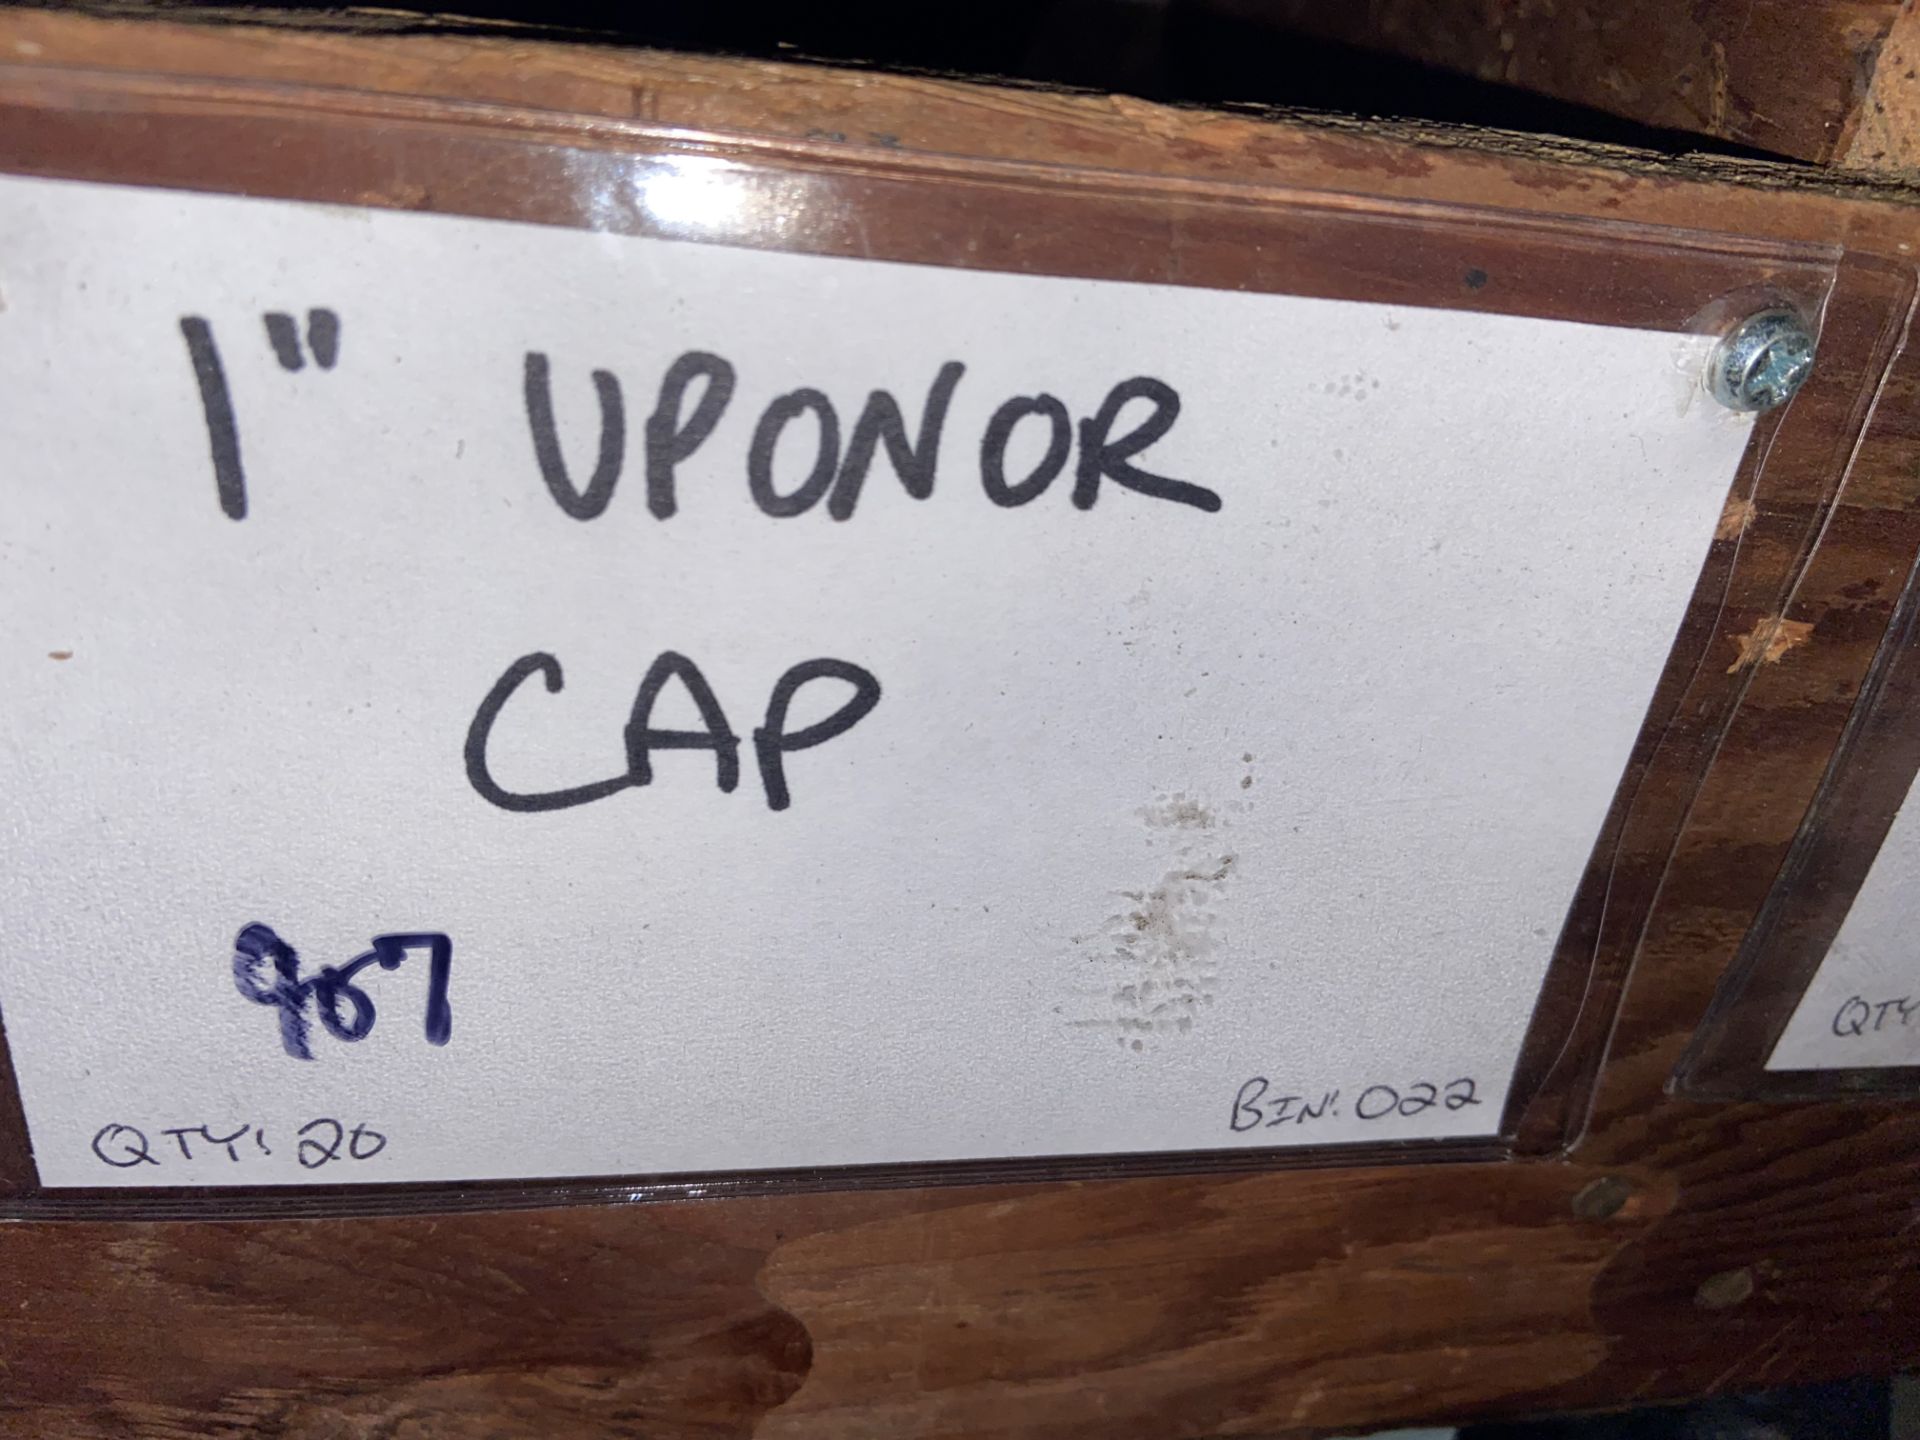 (20) 1” Uponor Cap (Bin:O22)(LOCATED IN MONROEVILLE, PA) - Image 2 of 2